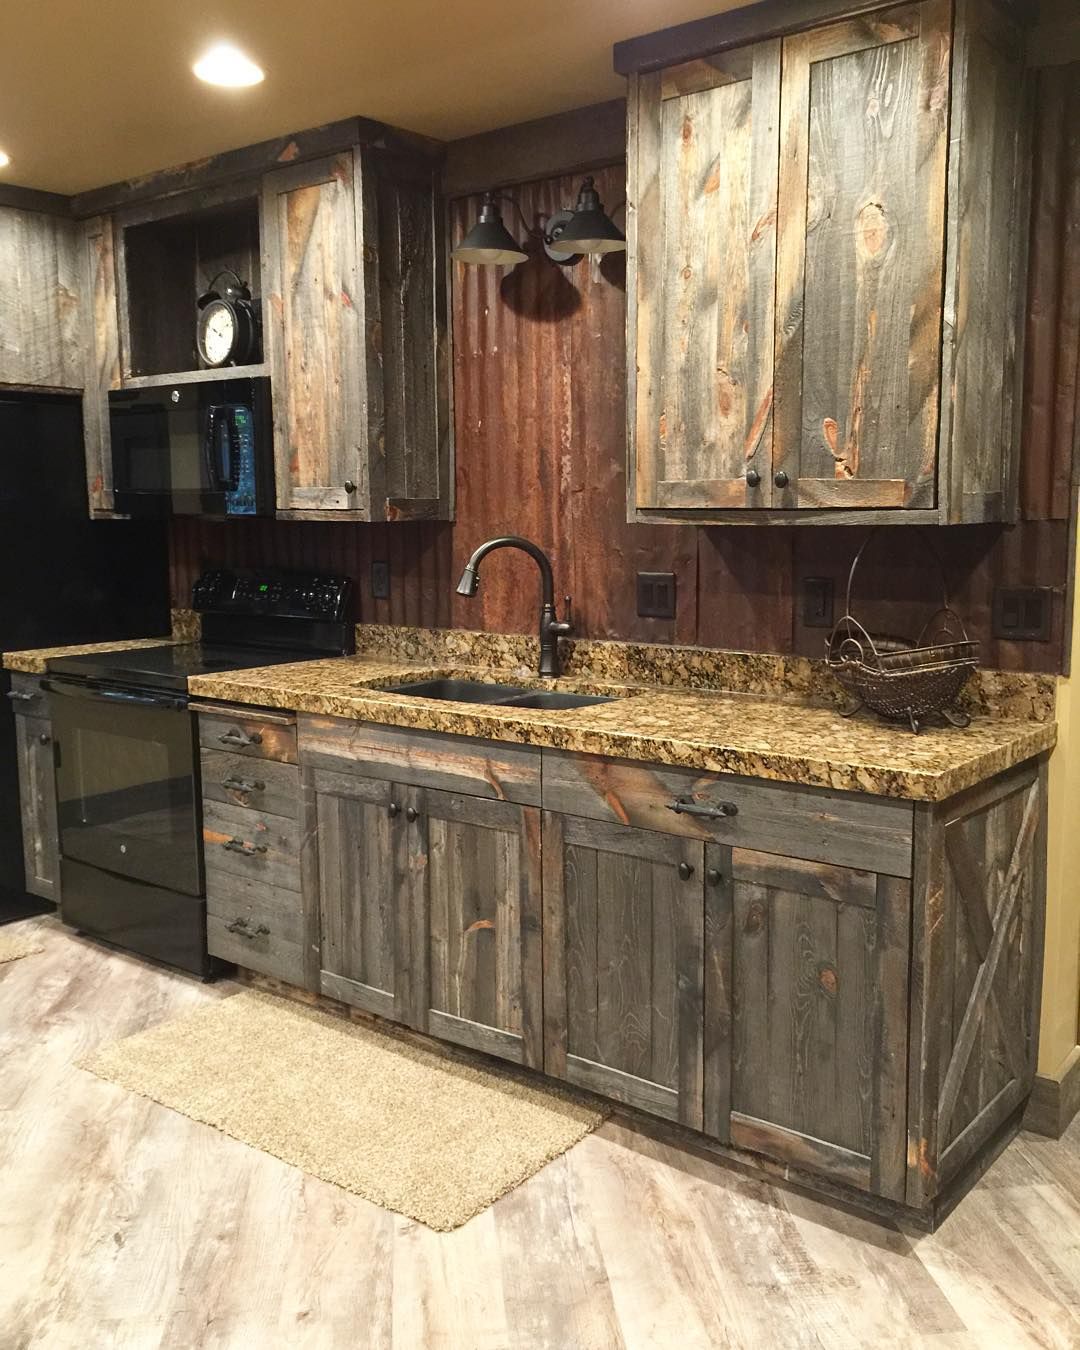 A little barnwood kitchen cabinets and corrugated steel backsplash. Love  how rustic and homey it is! #cabininthewoods.